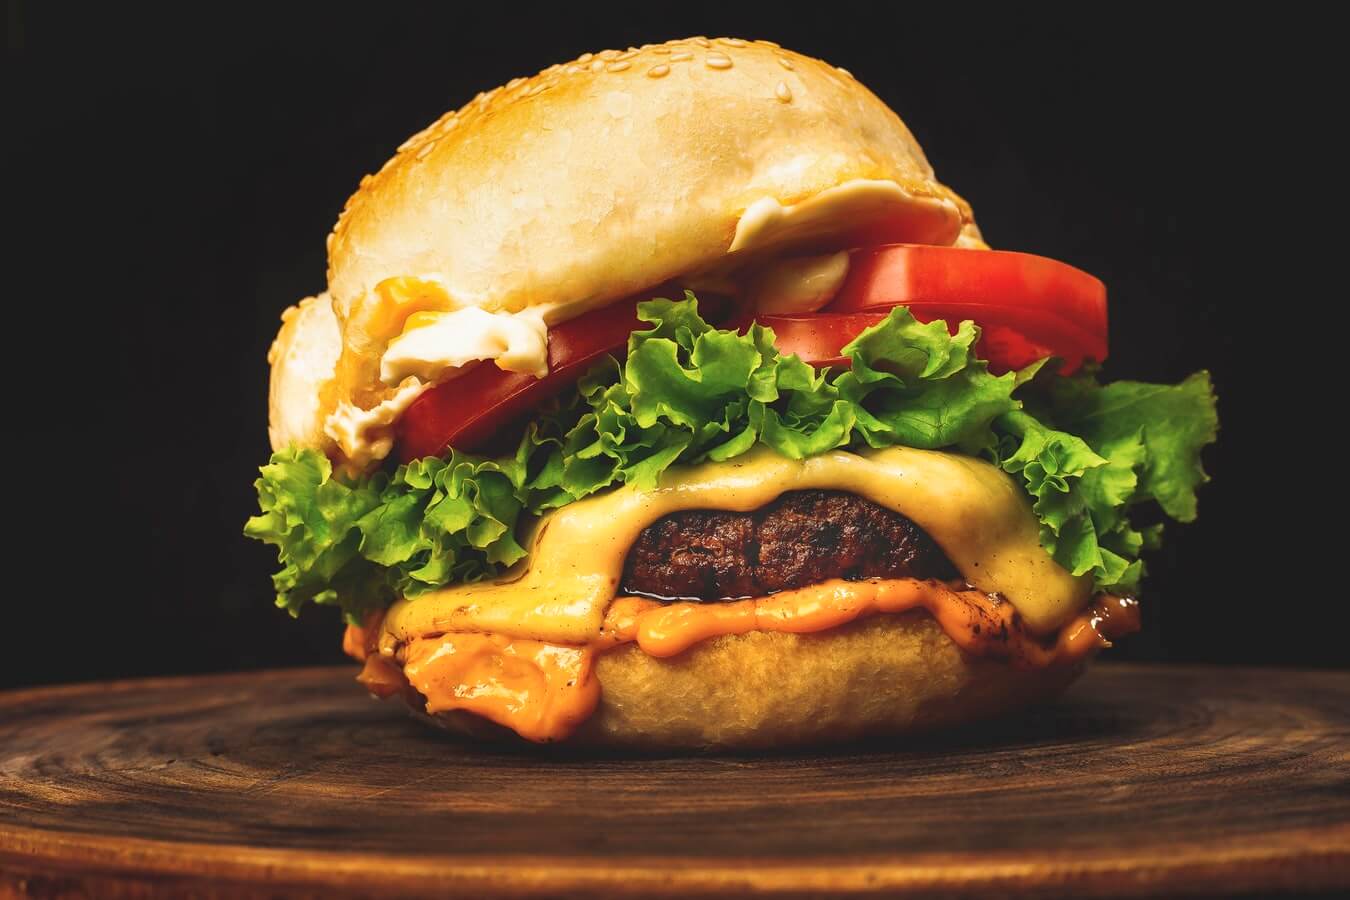 Cheeseburger with American Cheese, Lettuce, and Tomato